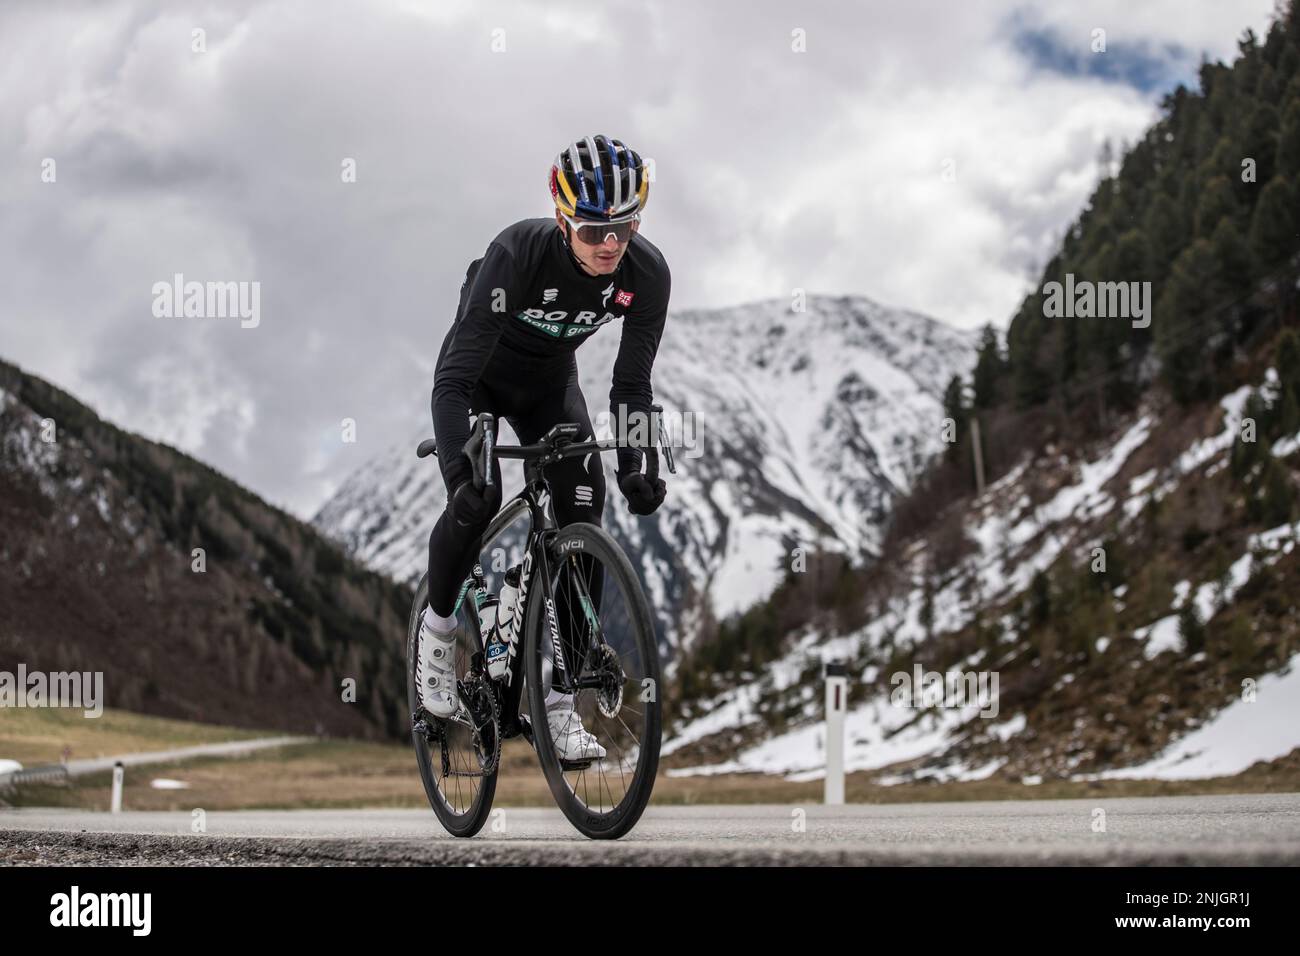 Anton Palzer earned a reputation as one of the best ski mountaineers in the world and accomplished mountain runner, but in 2021 he decided to swap them for road cycling with new